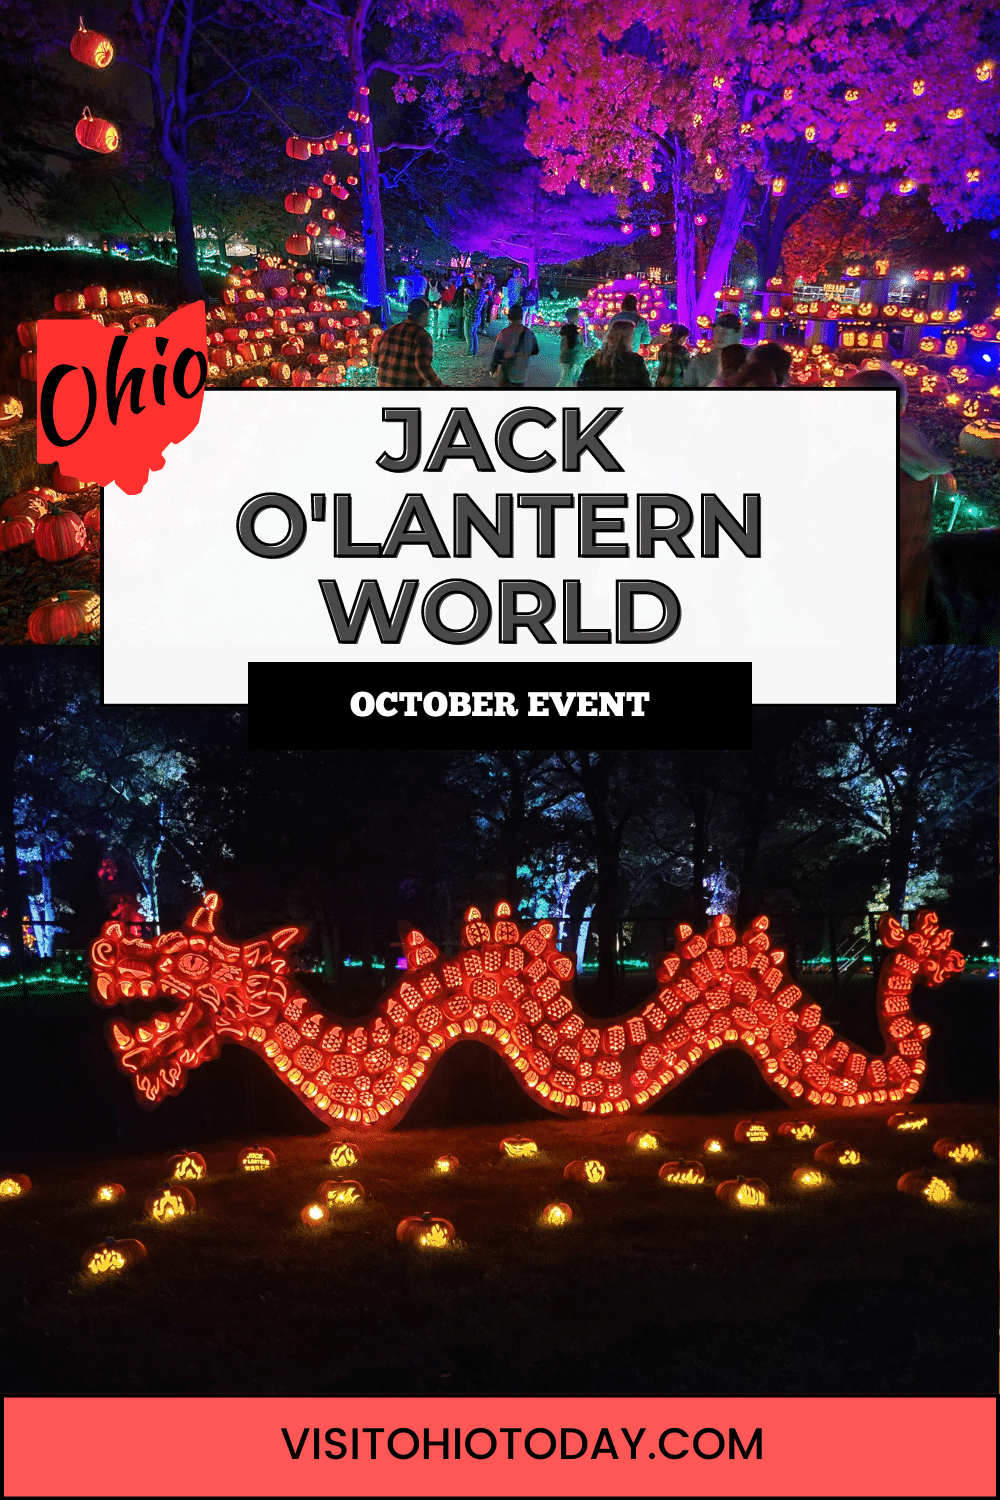 1000’s of hand-carved jack o ’lanterns are coming to Columbus at Franklin County Fairground’s newest fall attraction: Jack O Lantern World. This experience will feature Ohio’s largest 1000+ LB Jack O'Lanterns. With an expected attendance of over 60,000, this ¾-mile-long walk is designed to be an incredible experience to celebrate Halloween, art, nature, and fall.